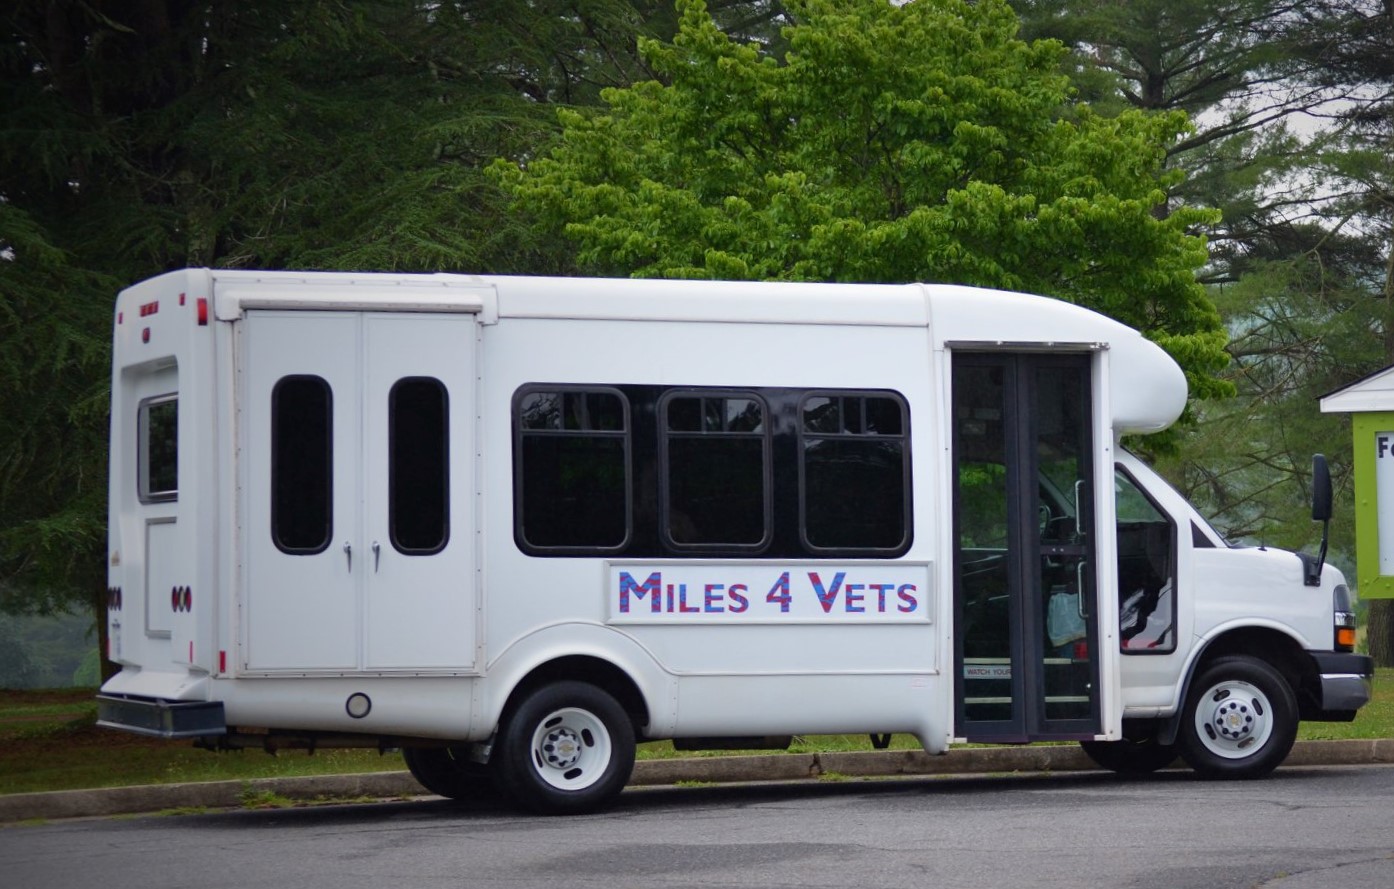 Southern Area Agency On Aging's "Miles 4 Vets" bus sits in a parking lot, with a tree overhead.